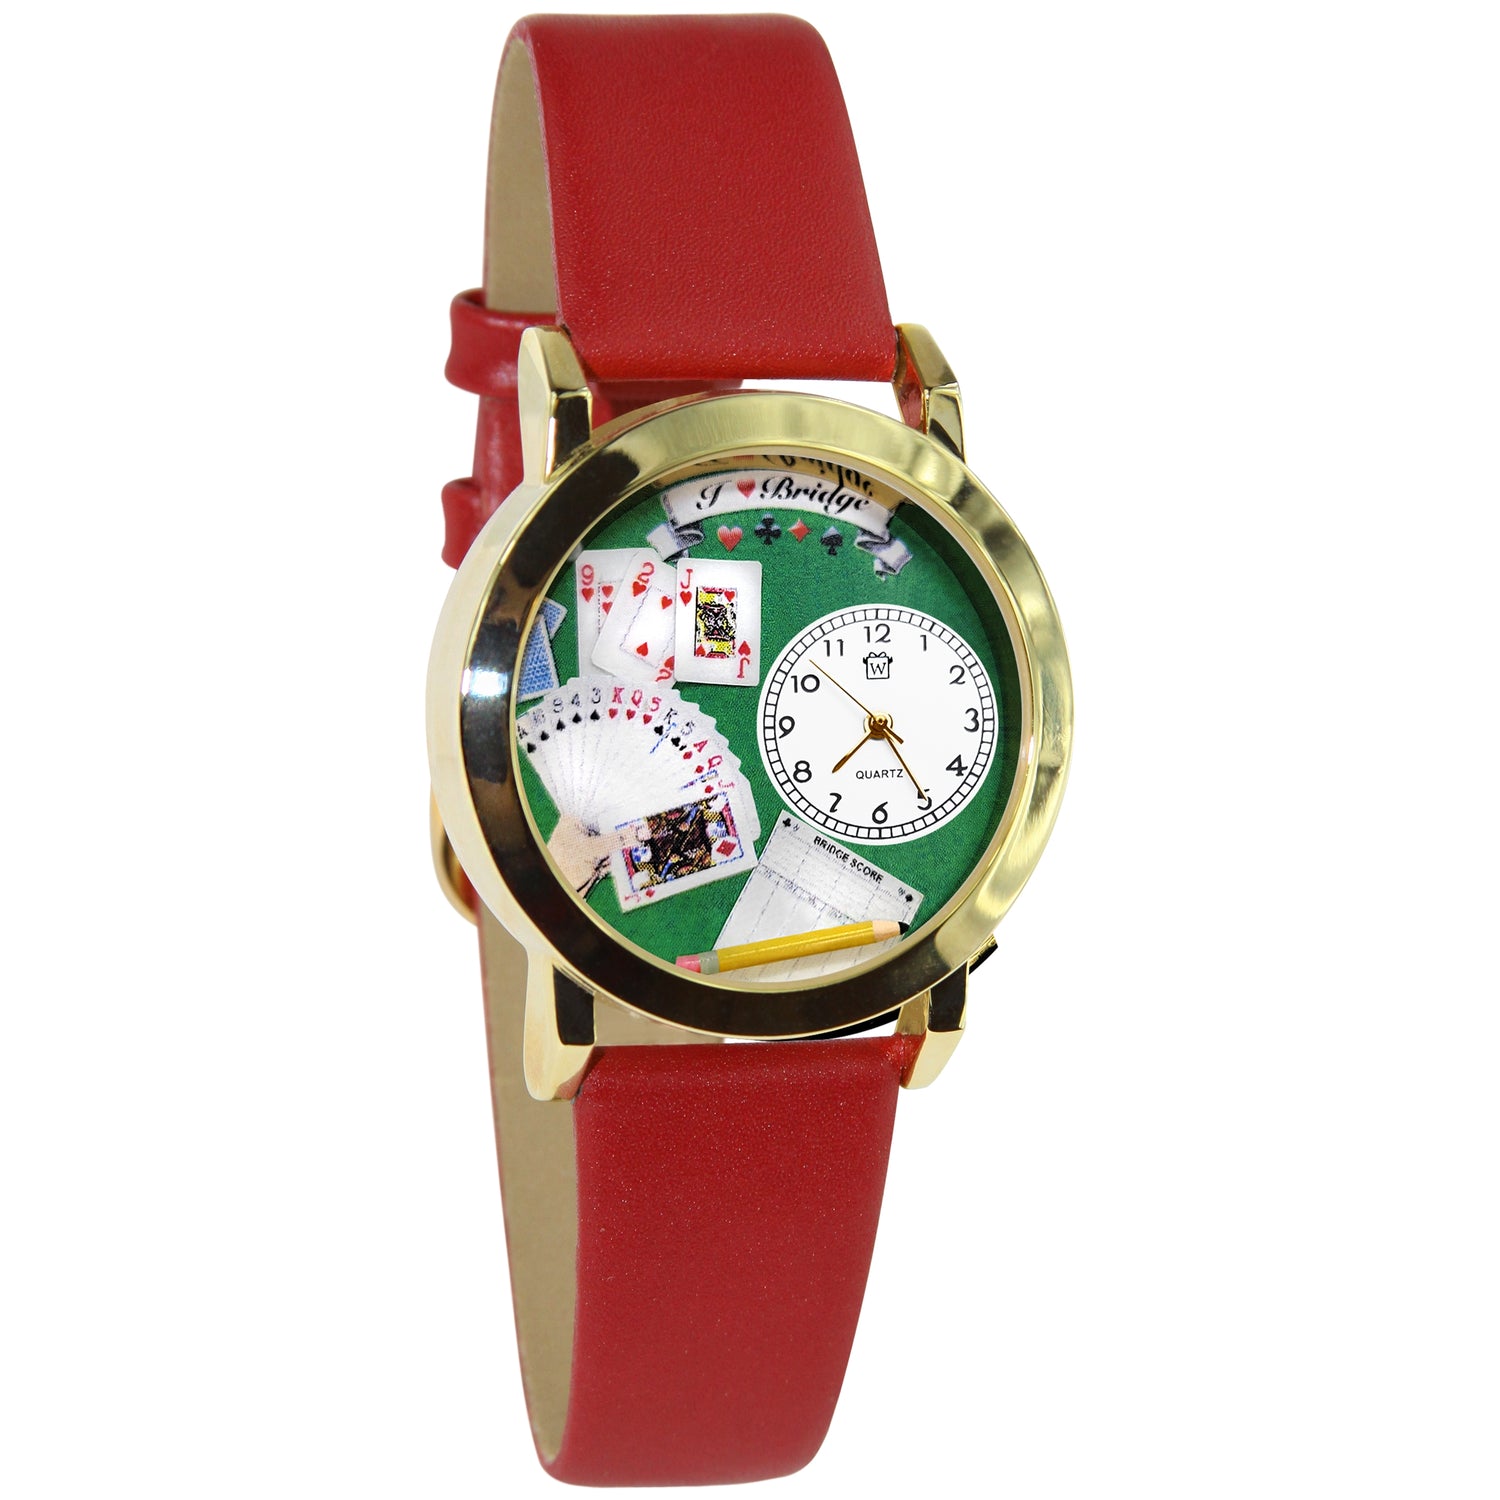 Whimsical Gifts | Bridge 3D Watch Small Style | Handmade in USA | Hobbies & Special Interests | Casino | Gaming | Game Night | Novelty Unique Fun Miniatures Gift | Gold Finish Red Leather Watch Band